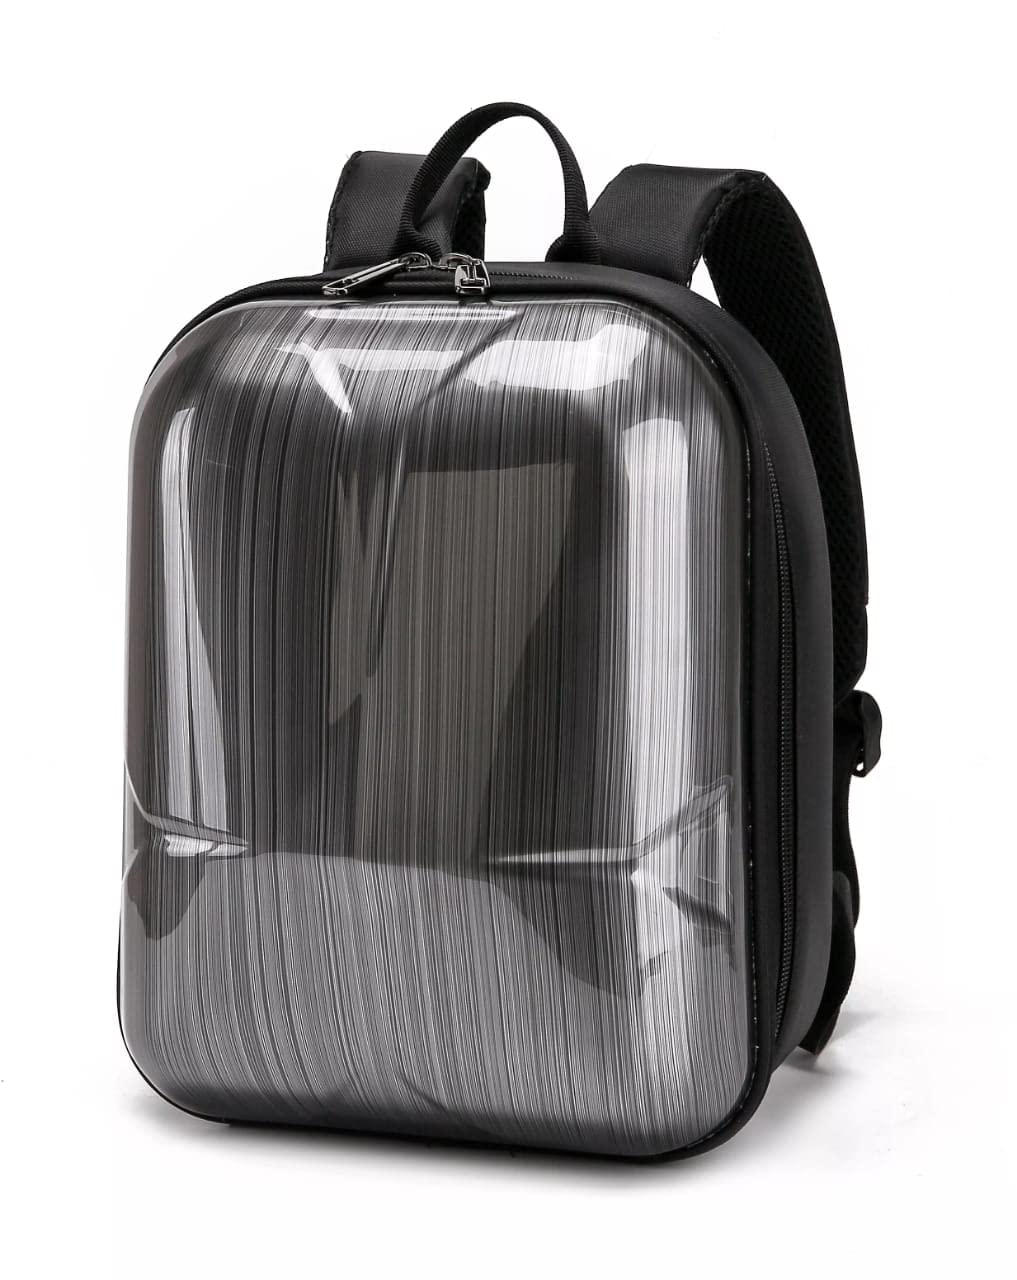 Carrying Case Bag For DJI Mini 2 Protective Hard Backpack Case GetZget